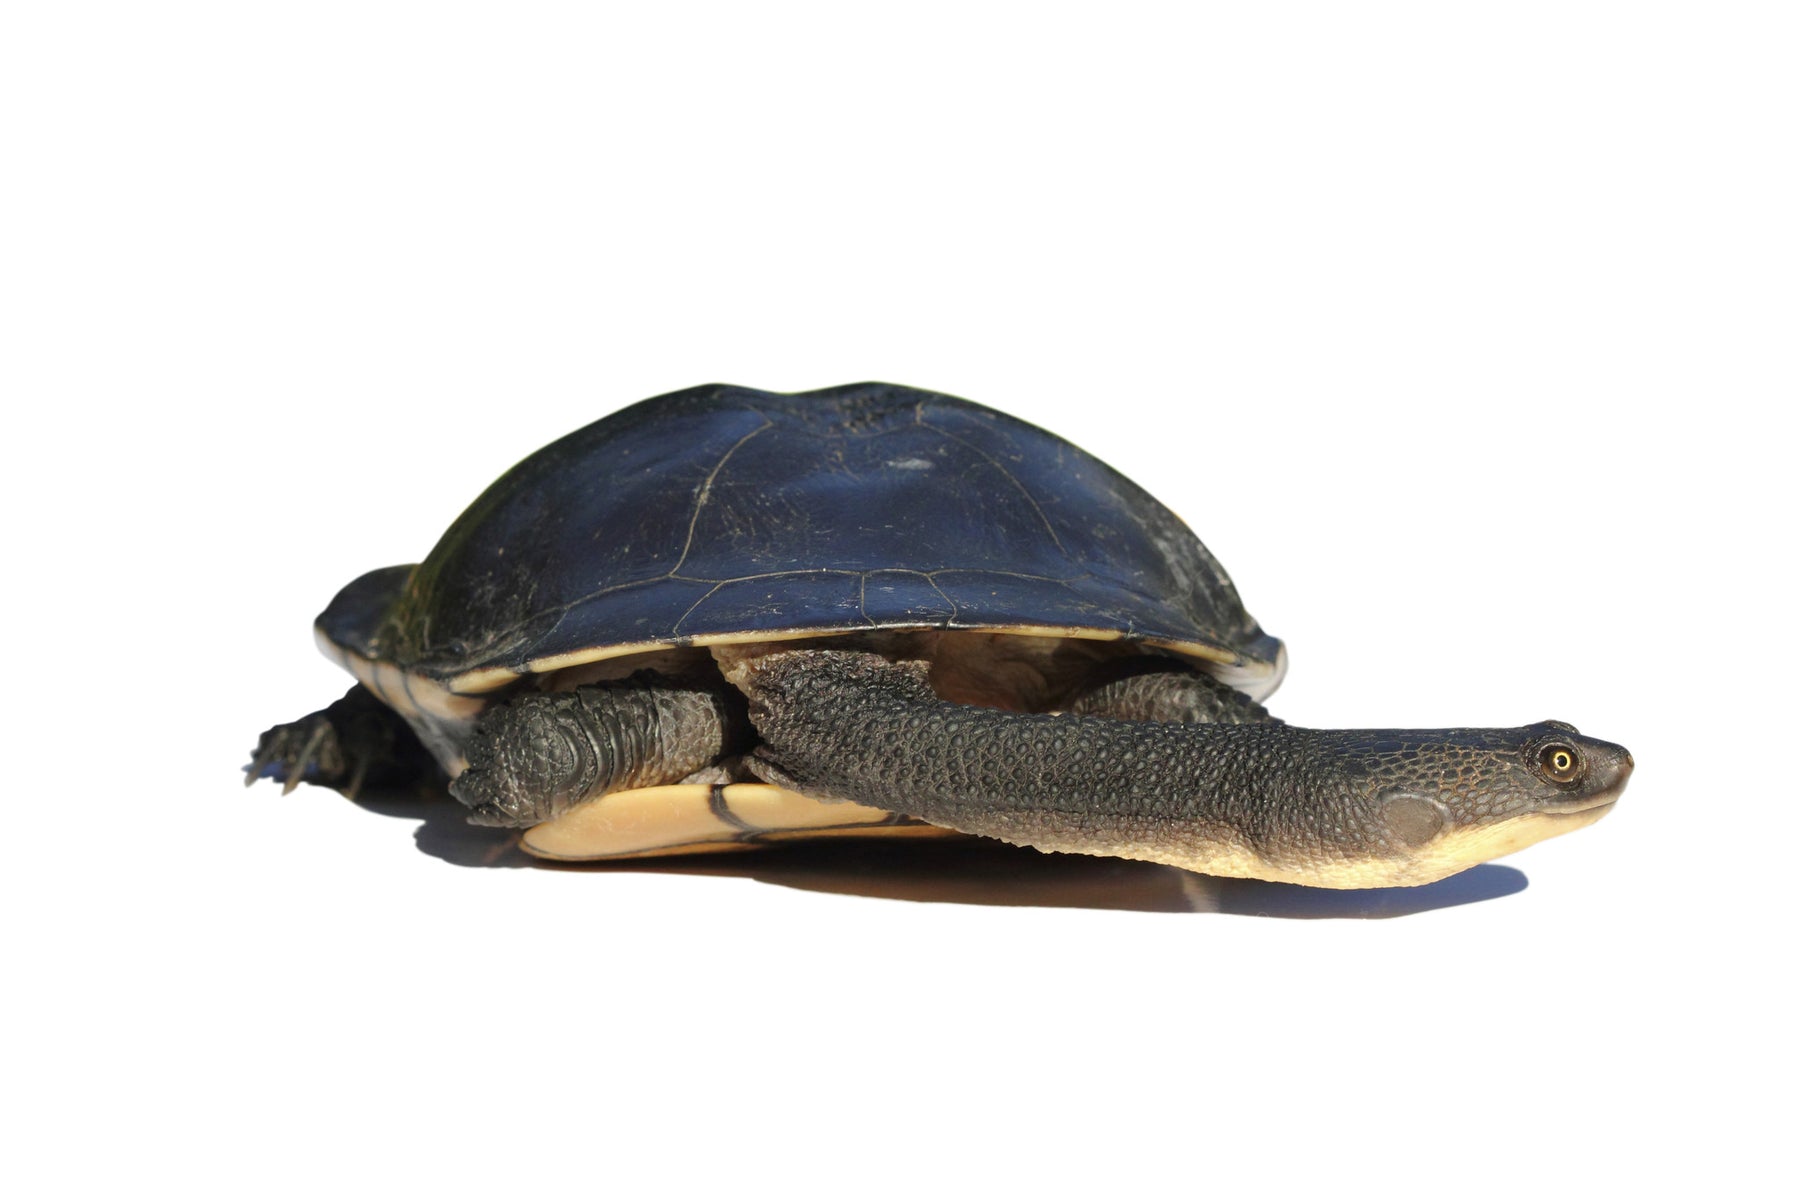 Ten Turtle Facts You May Not Know